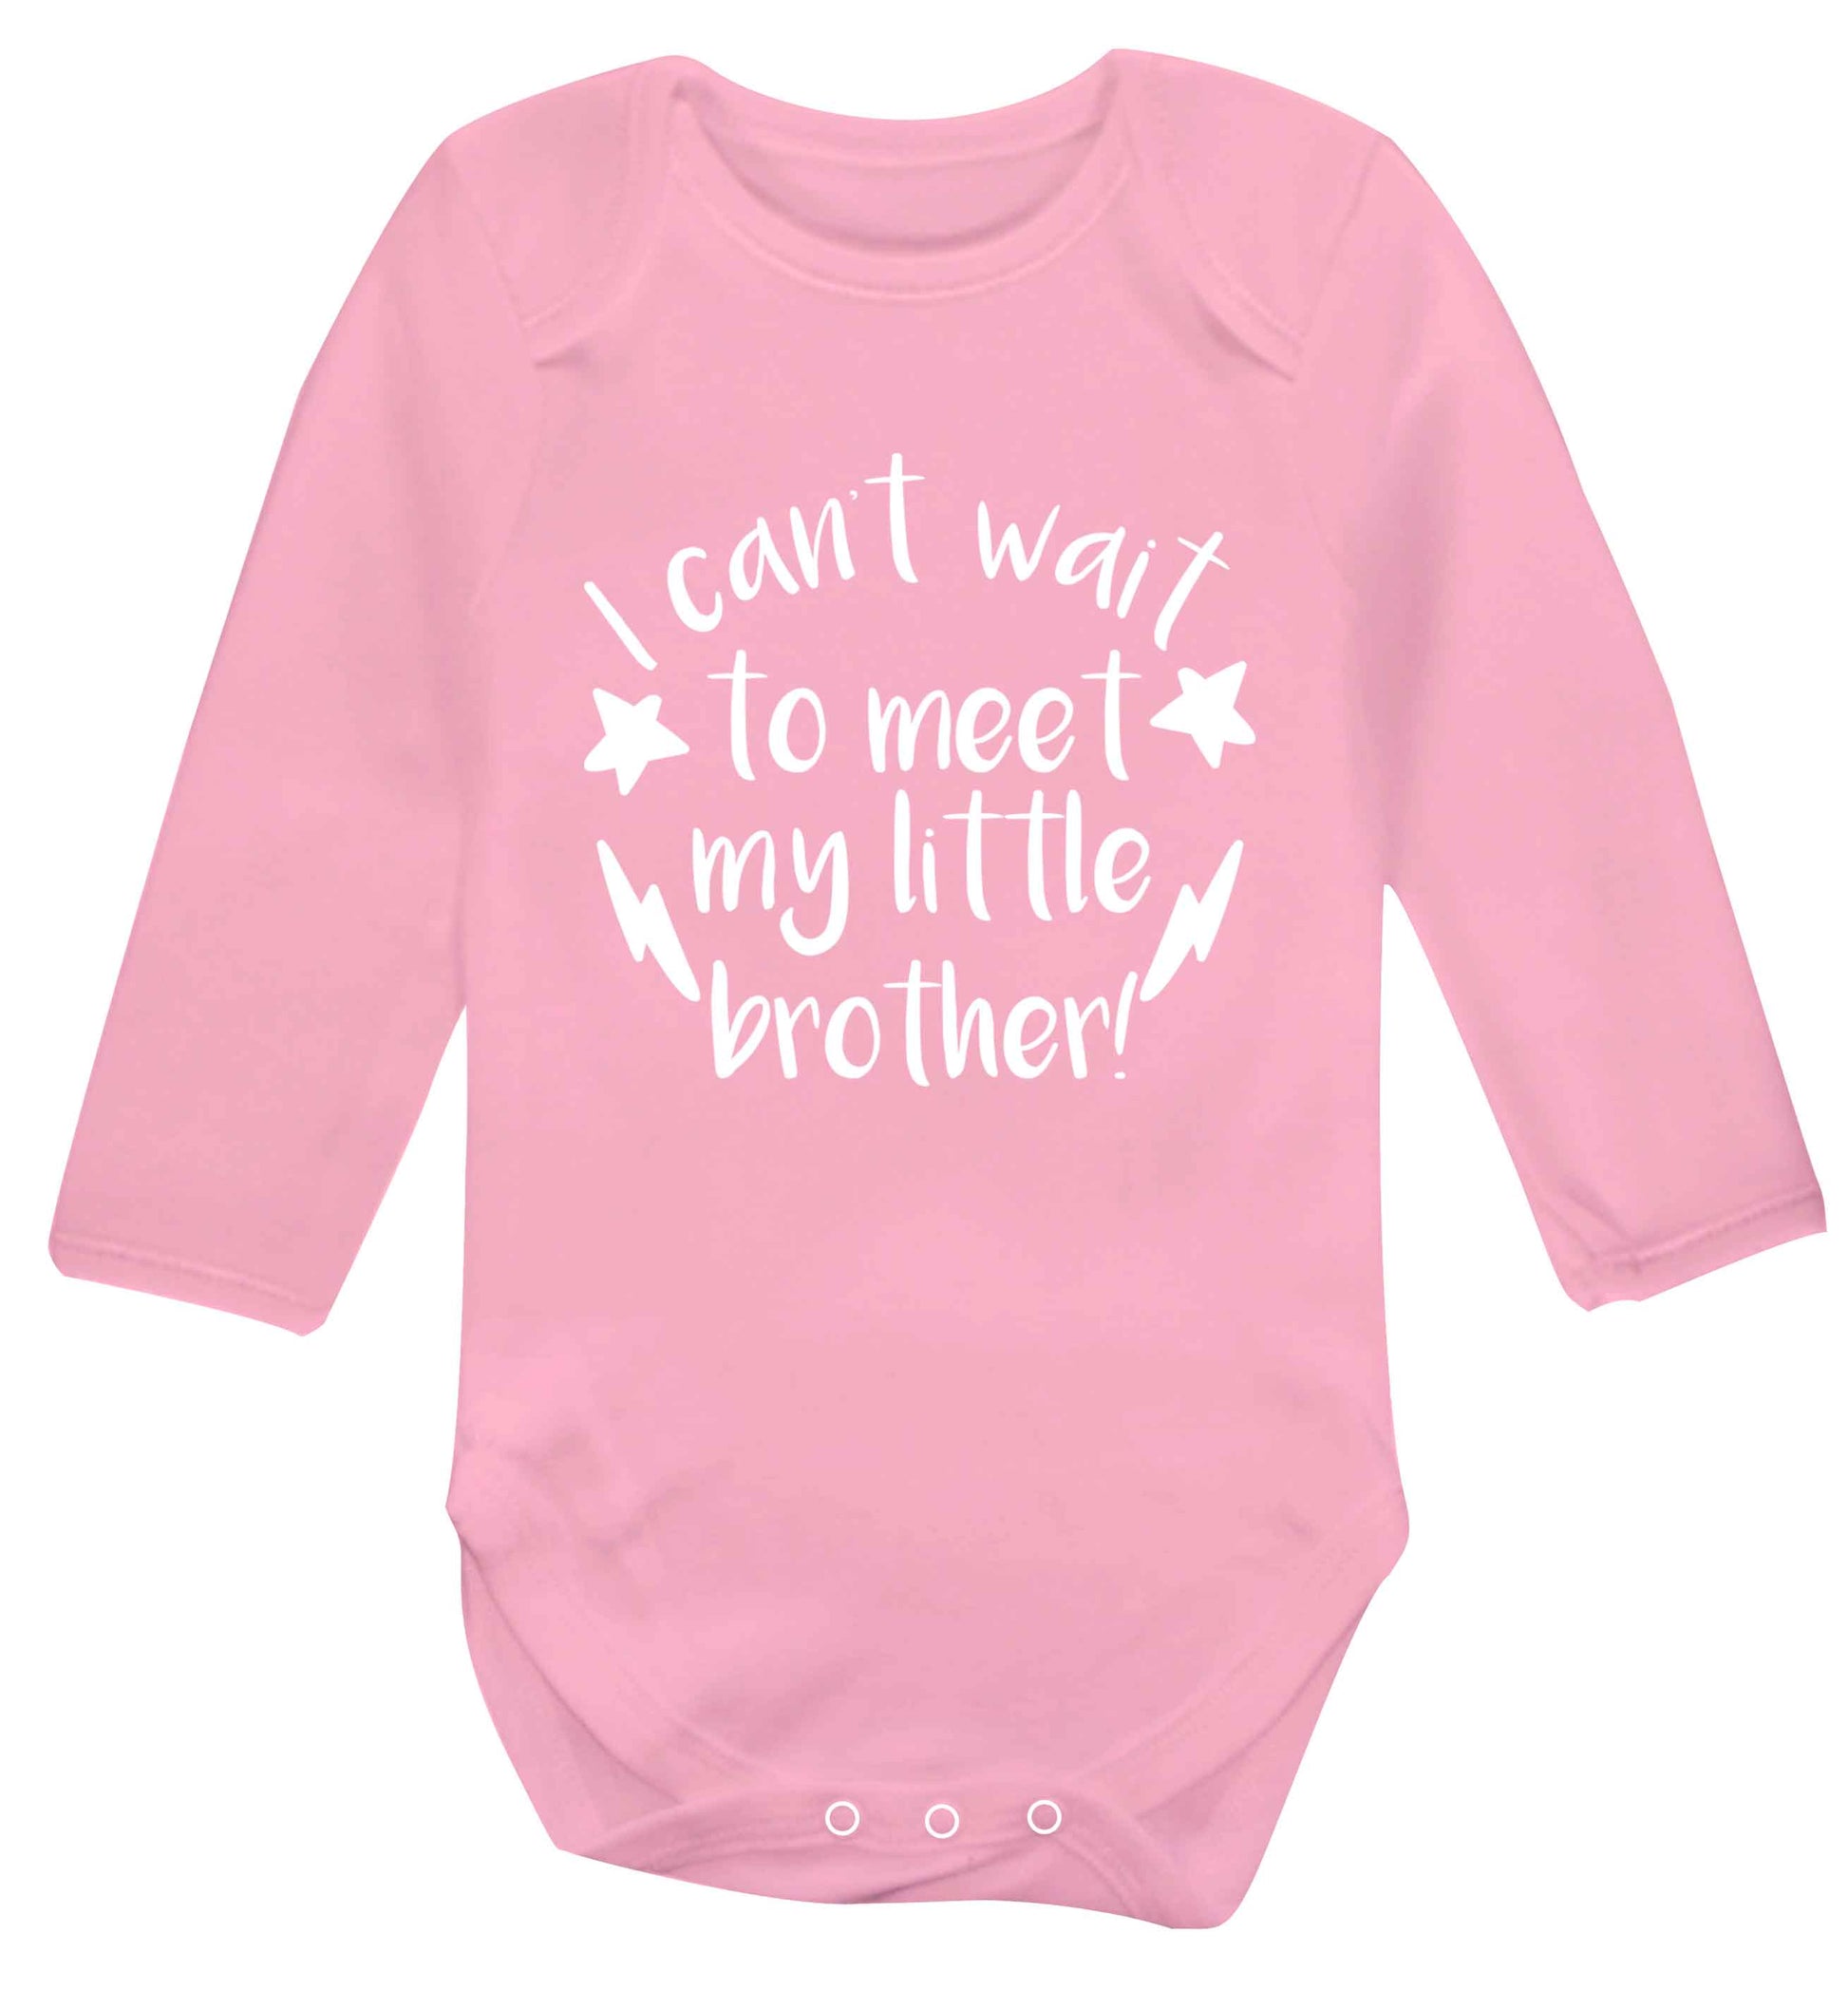 I can't wait to meet my sister! Baby Vest long sleeved pale pink 6-12 months